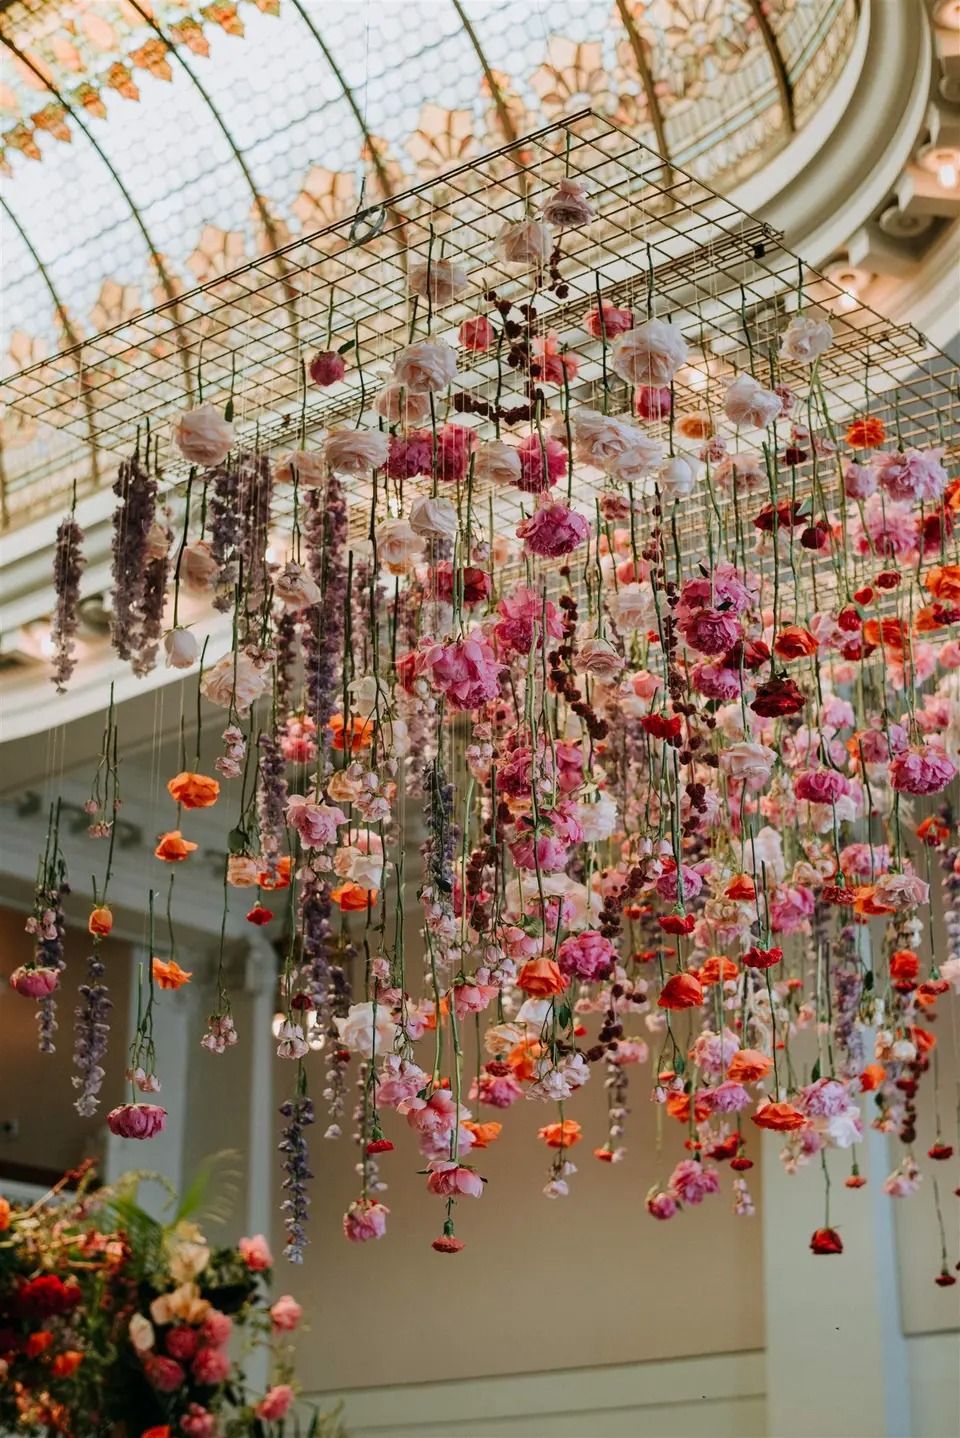 Hanging Flowers From Ceiling Innovative Way to Decorate with Suspended Flowers